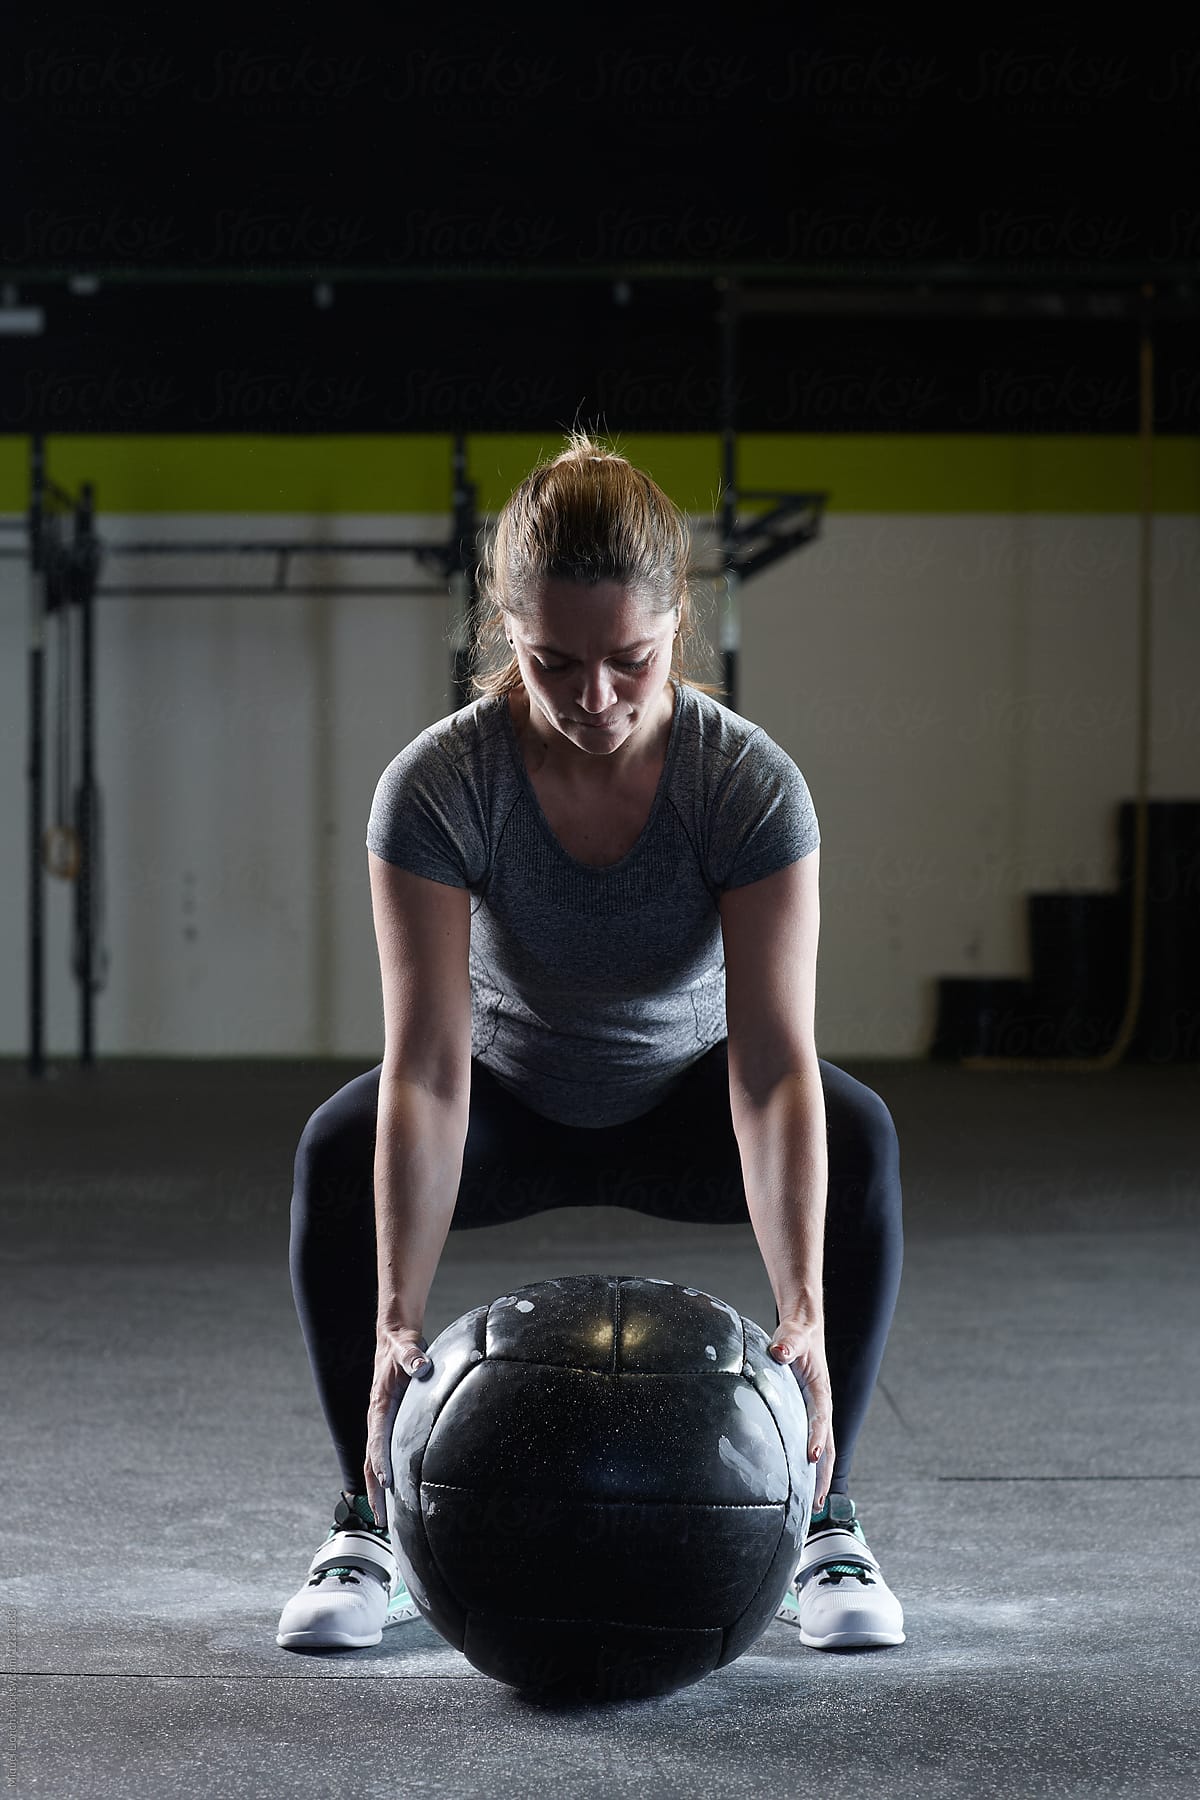 Fit woman positioning to lift heavy ball for workout